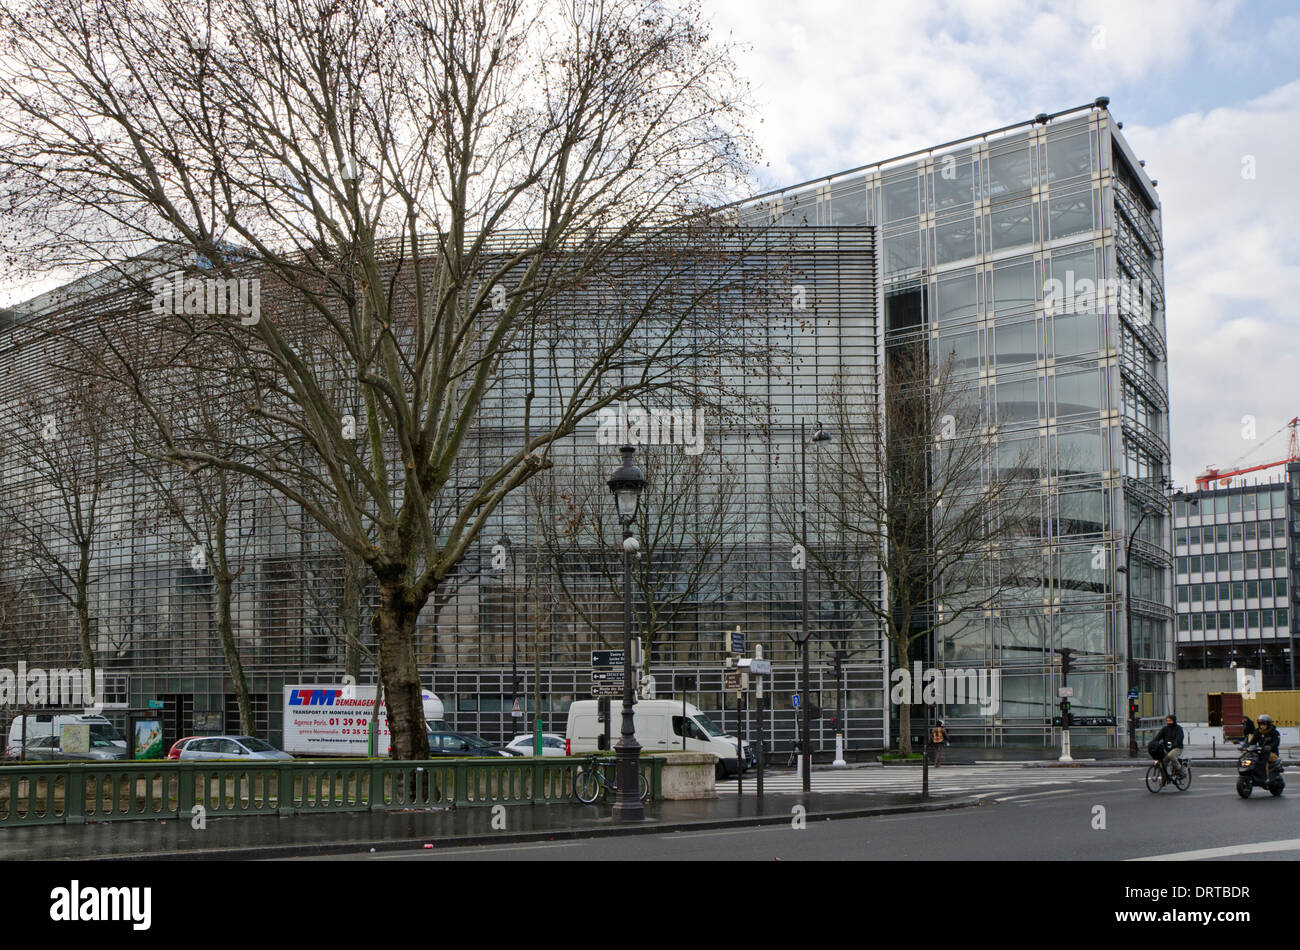 Facade of the Arab World Institute in Paris, France Stock Photo